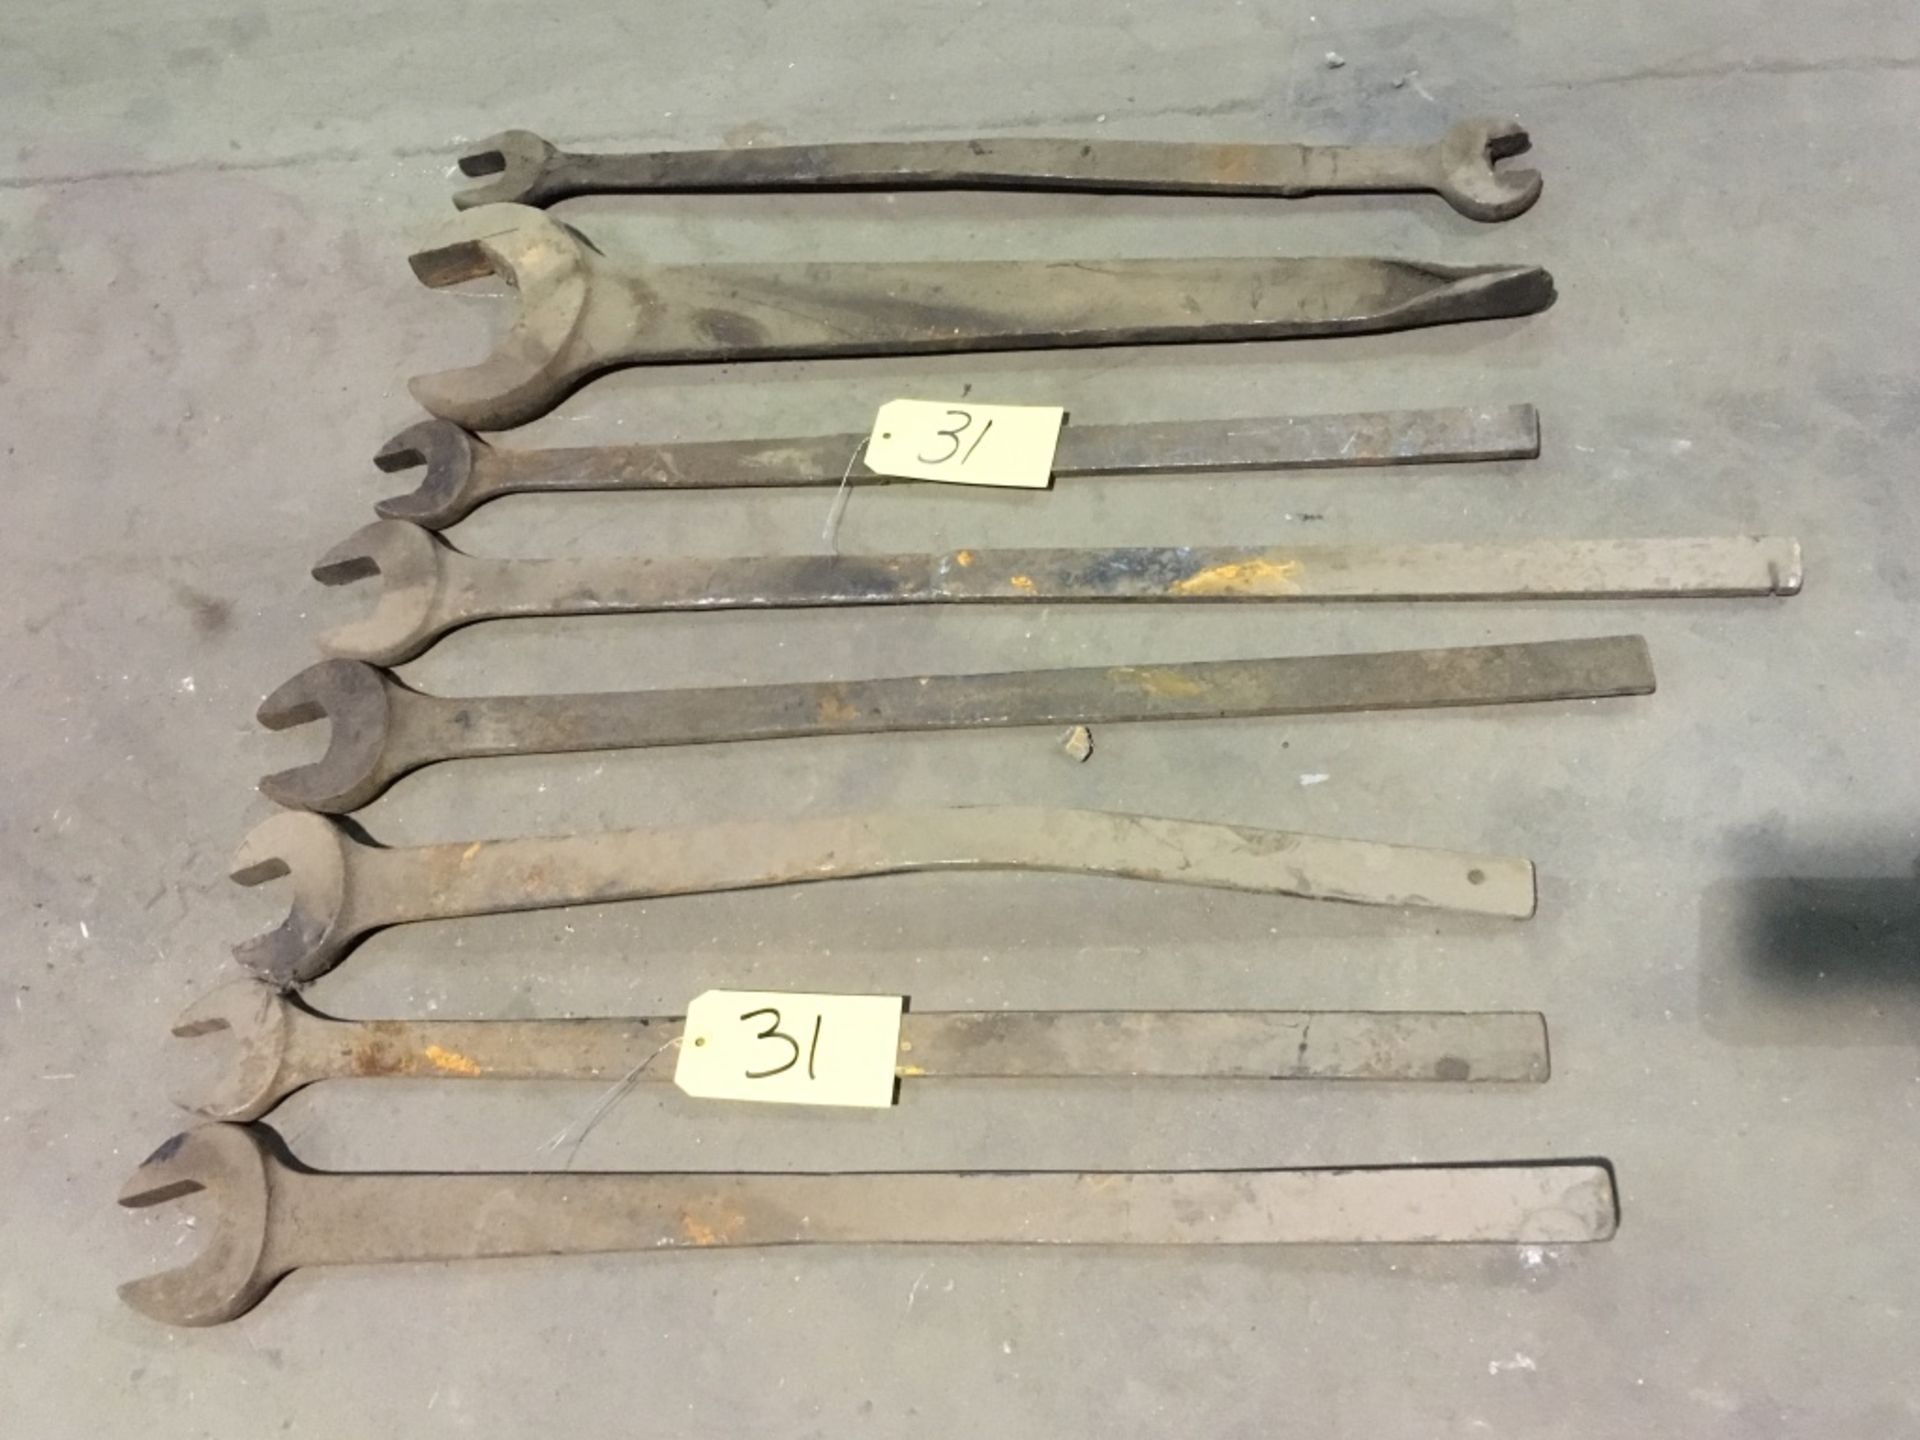 Approximately (8) long handled open end wrenches, heavy duty.